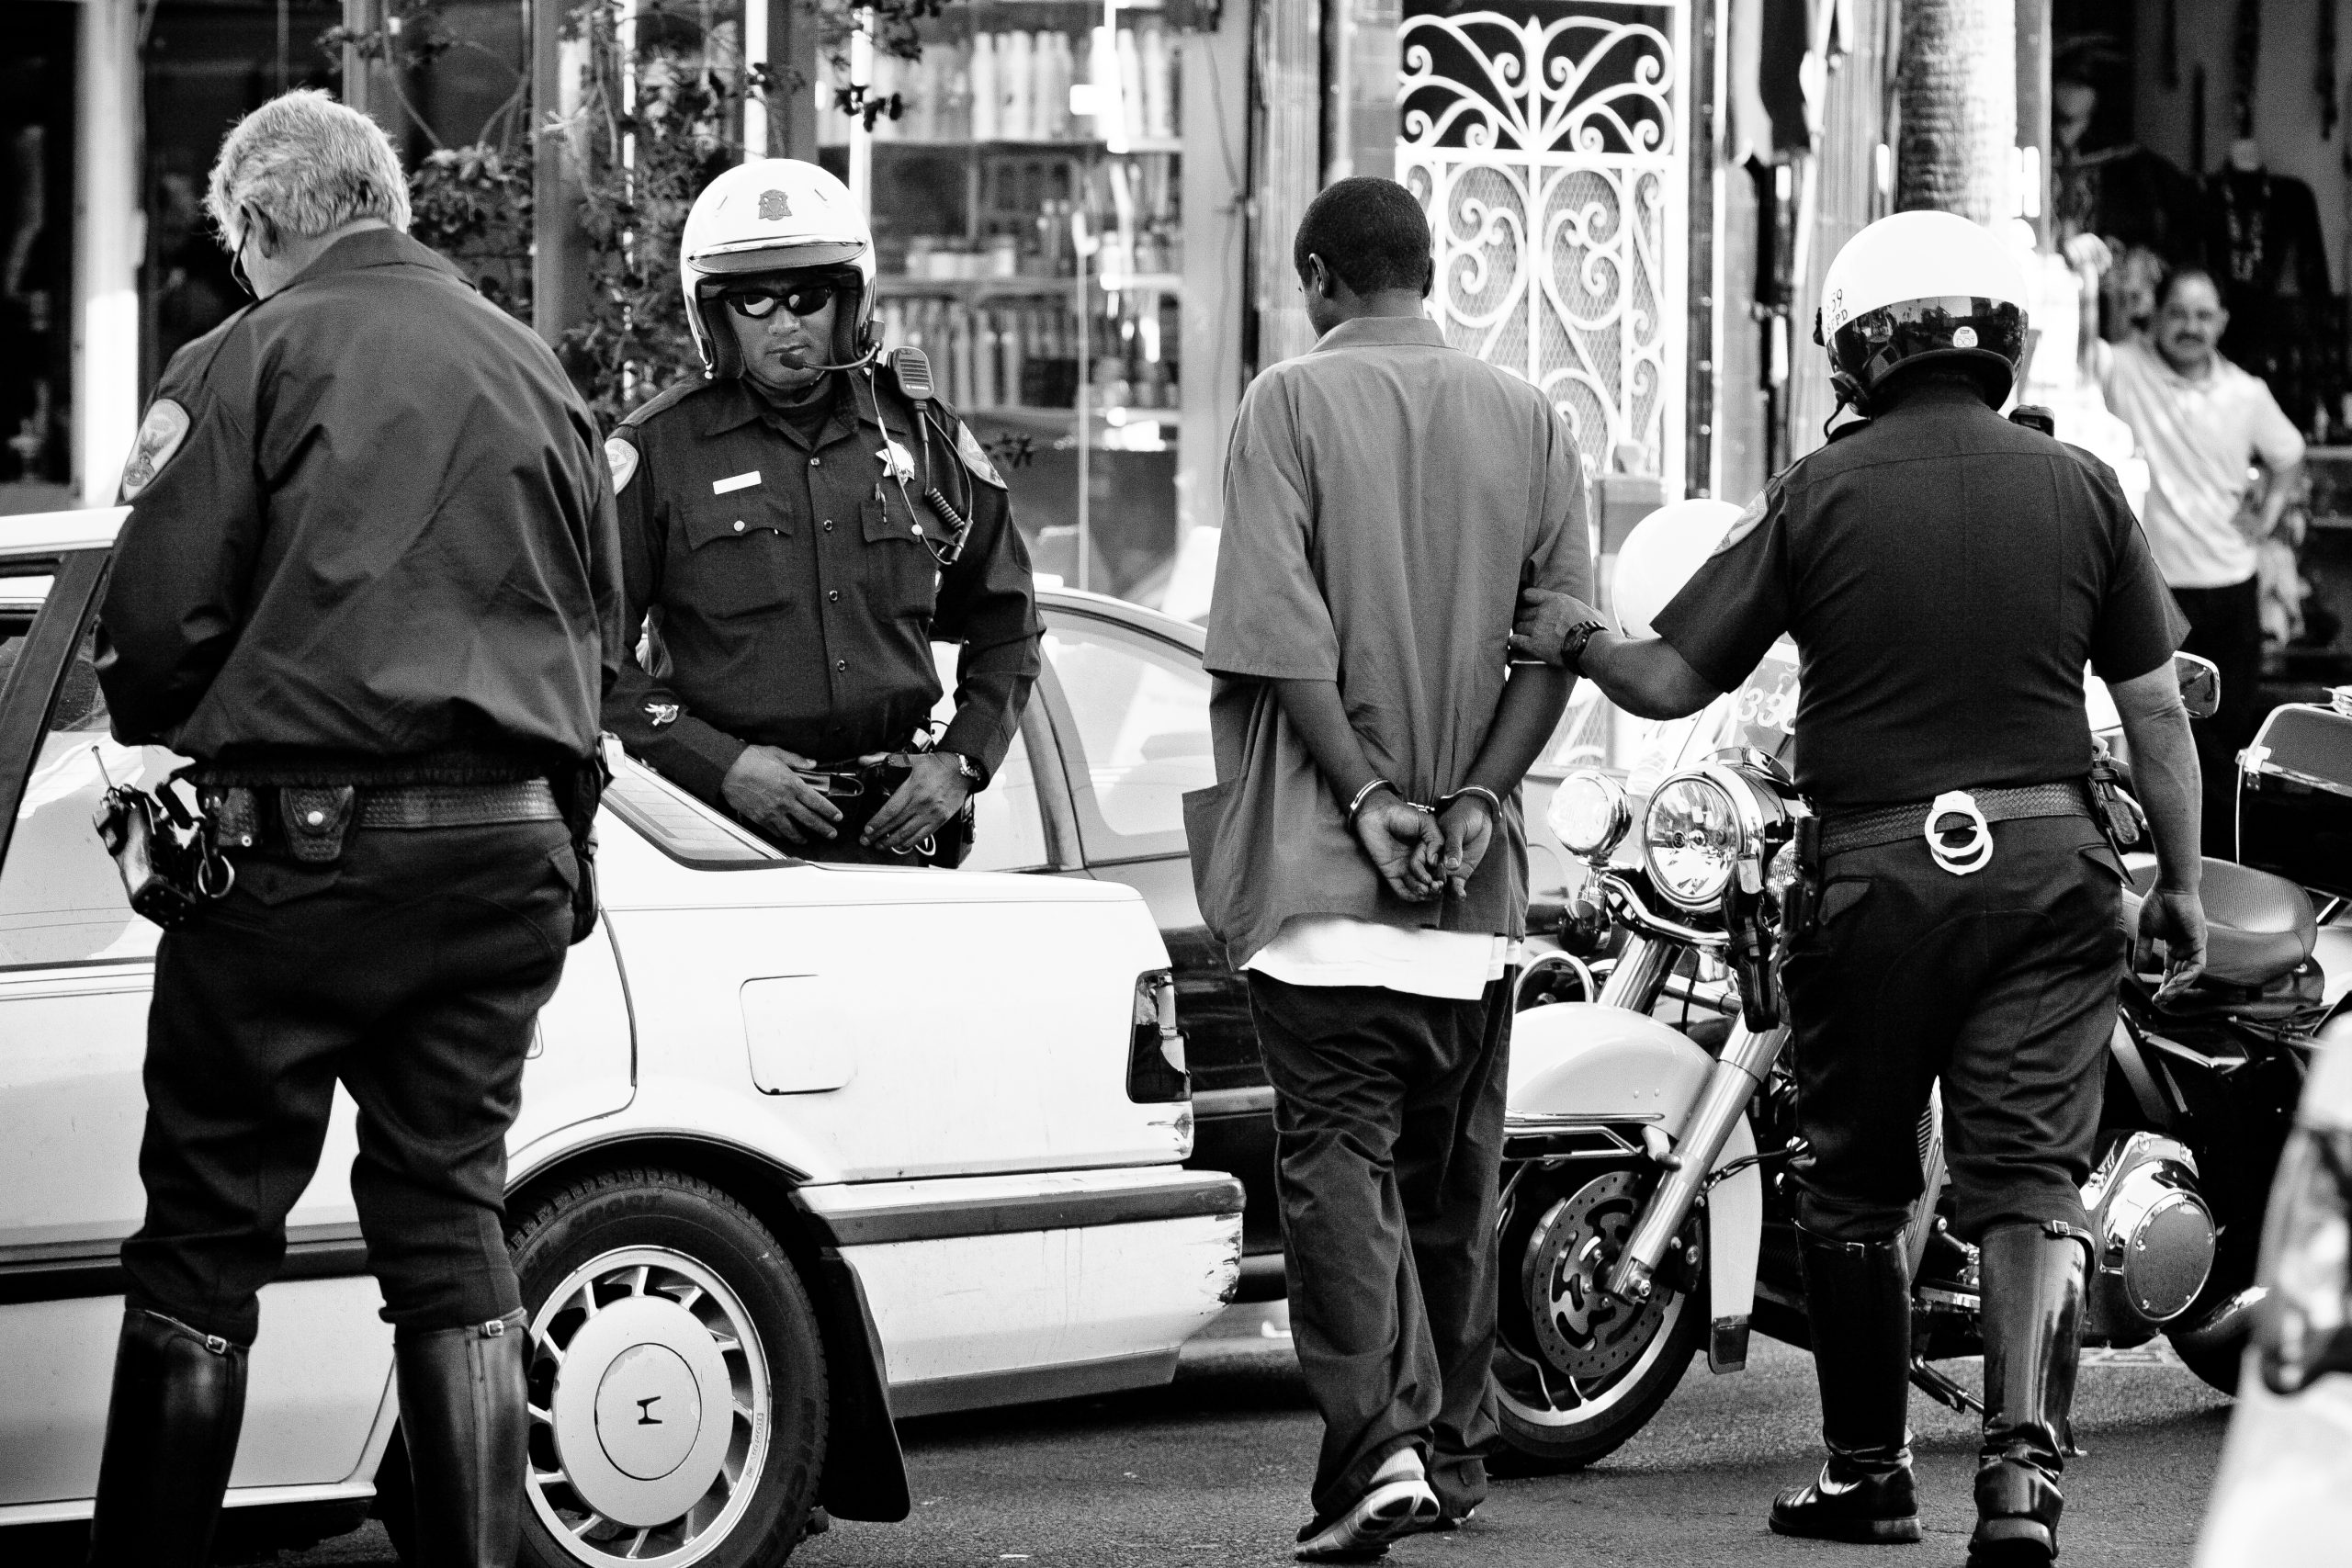 Photo of a 3 police officers, including 2 wearing motorcycle helmets, walking a young black man handcuffed behind his back.